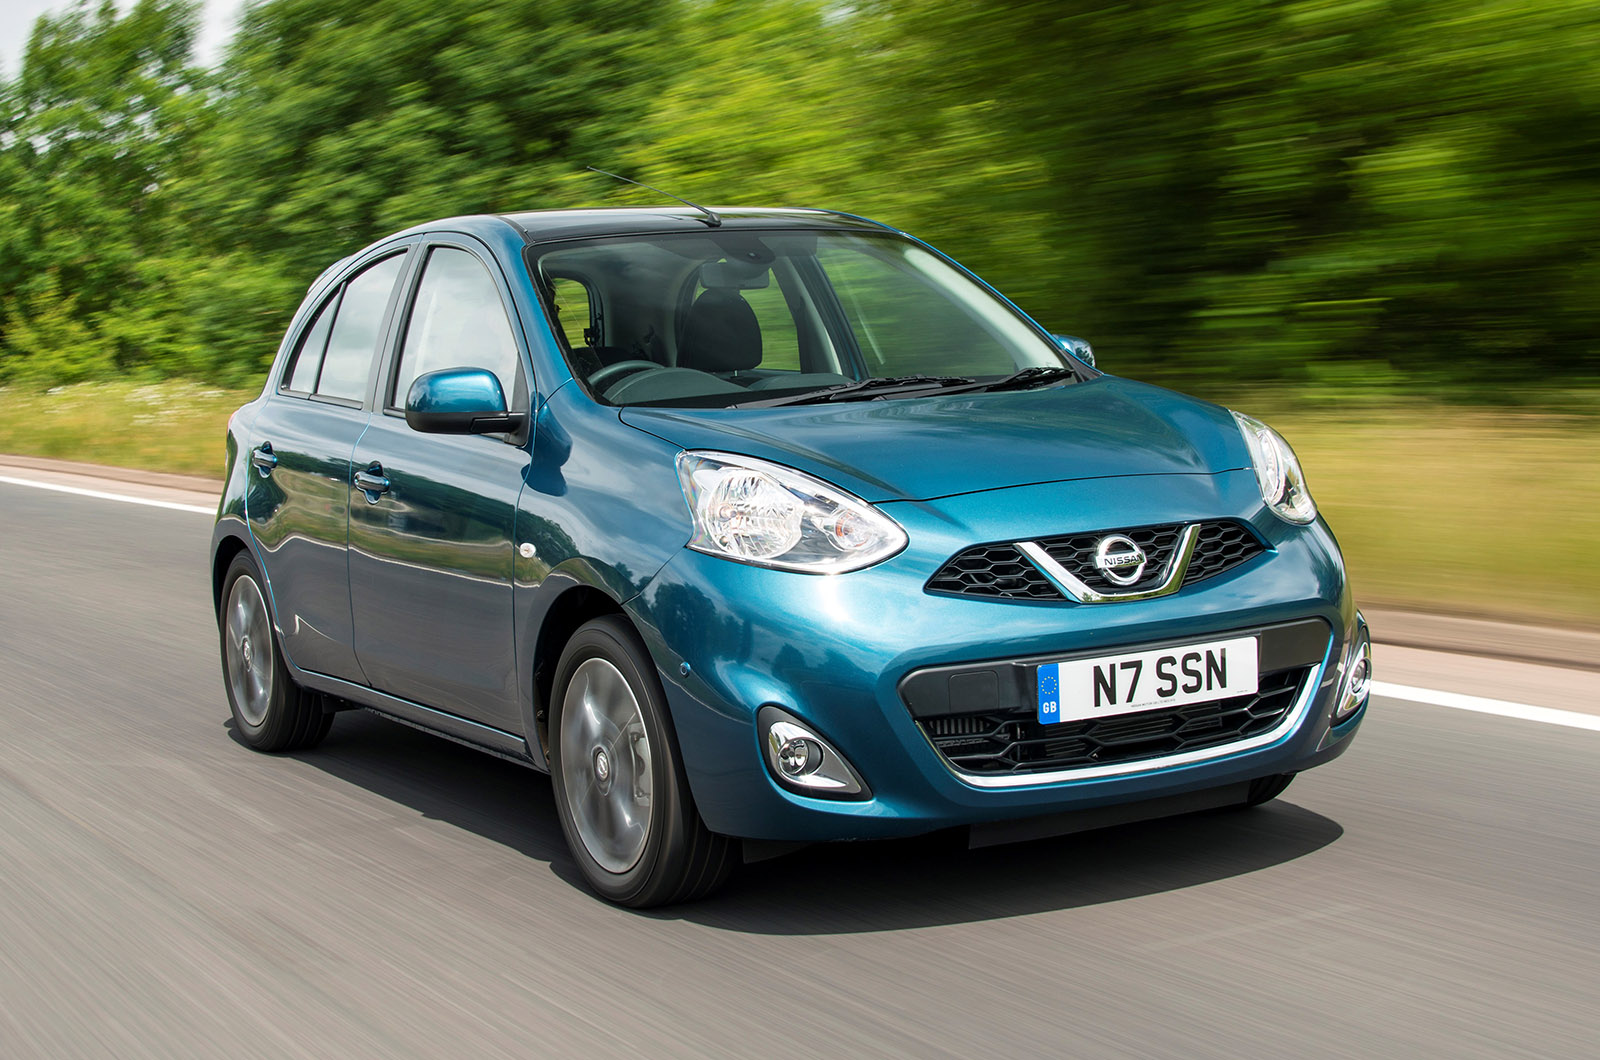 Used car buying guide: Nissan Micra 160SR